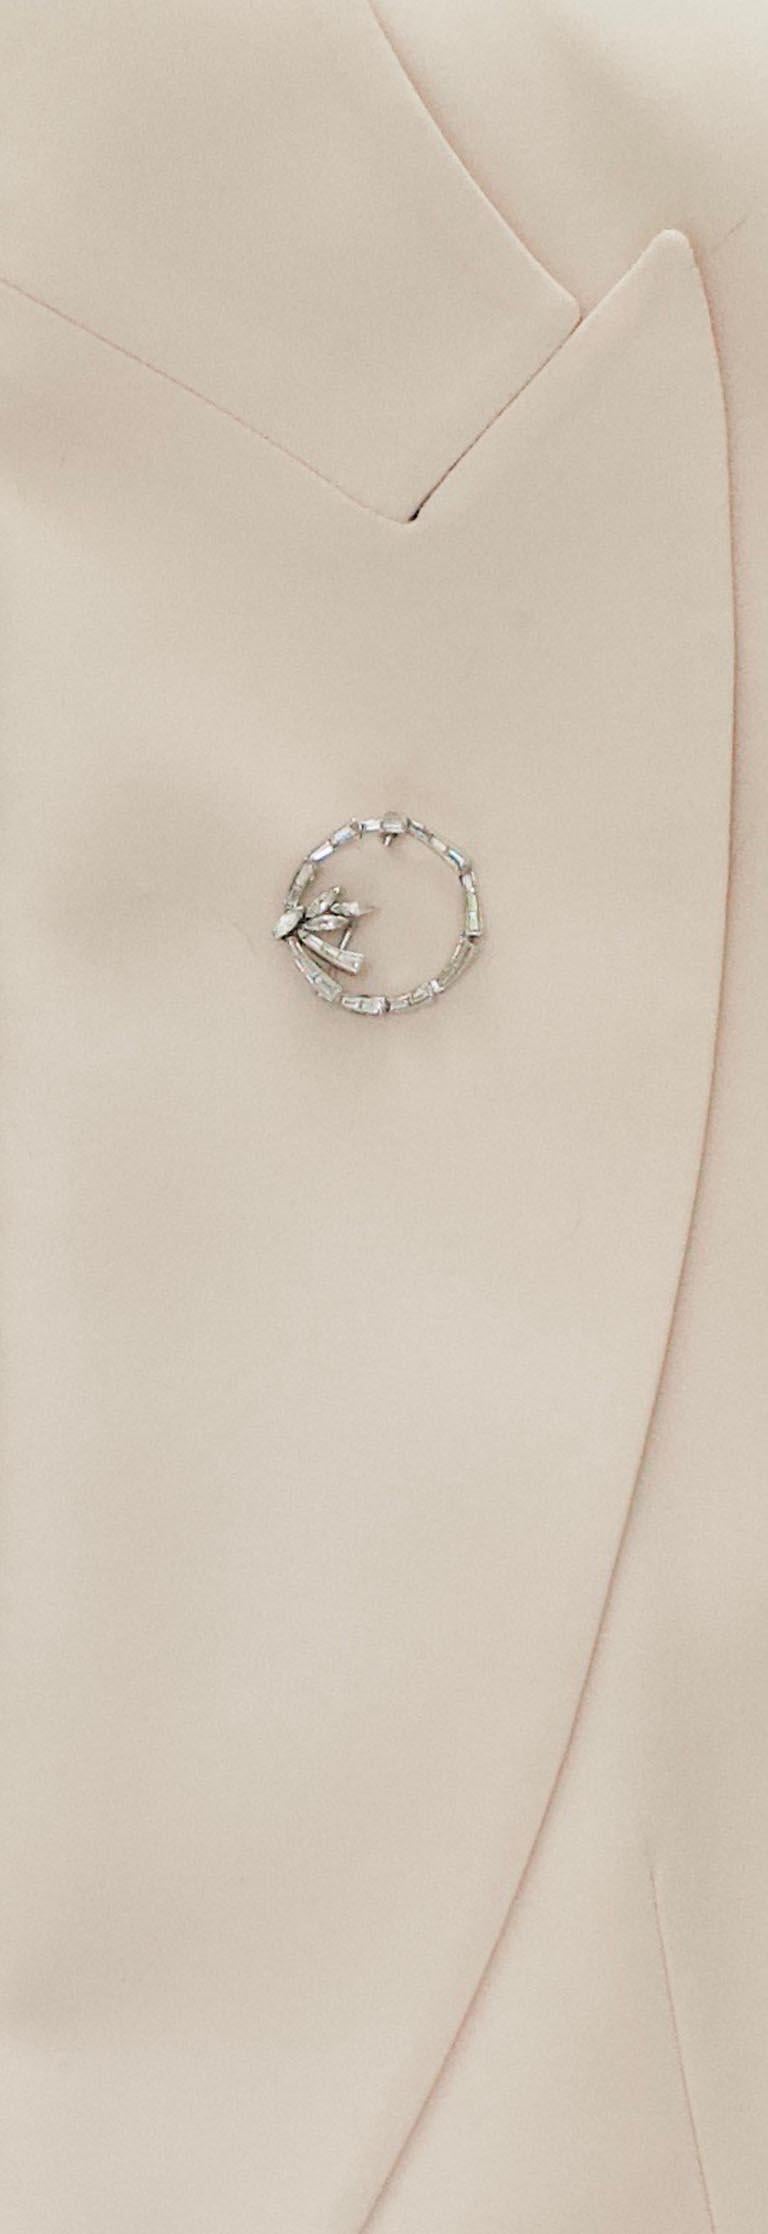 Diamond Circle Brooch in Platinum circa 1950s 2.50 Total Diamond Weight For Sale 2